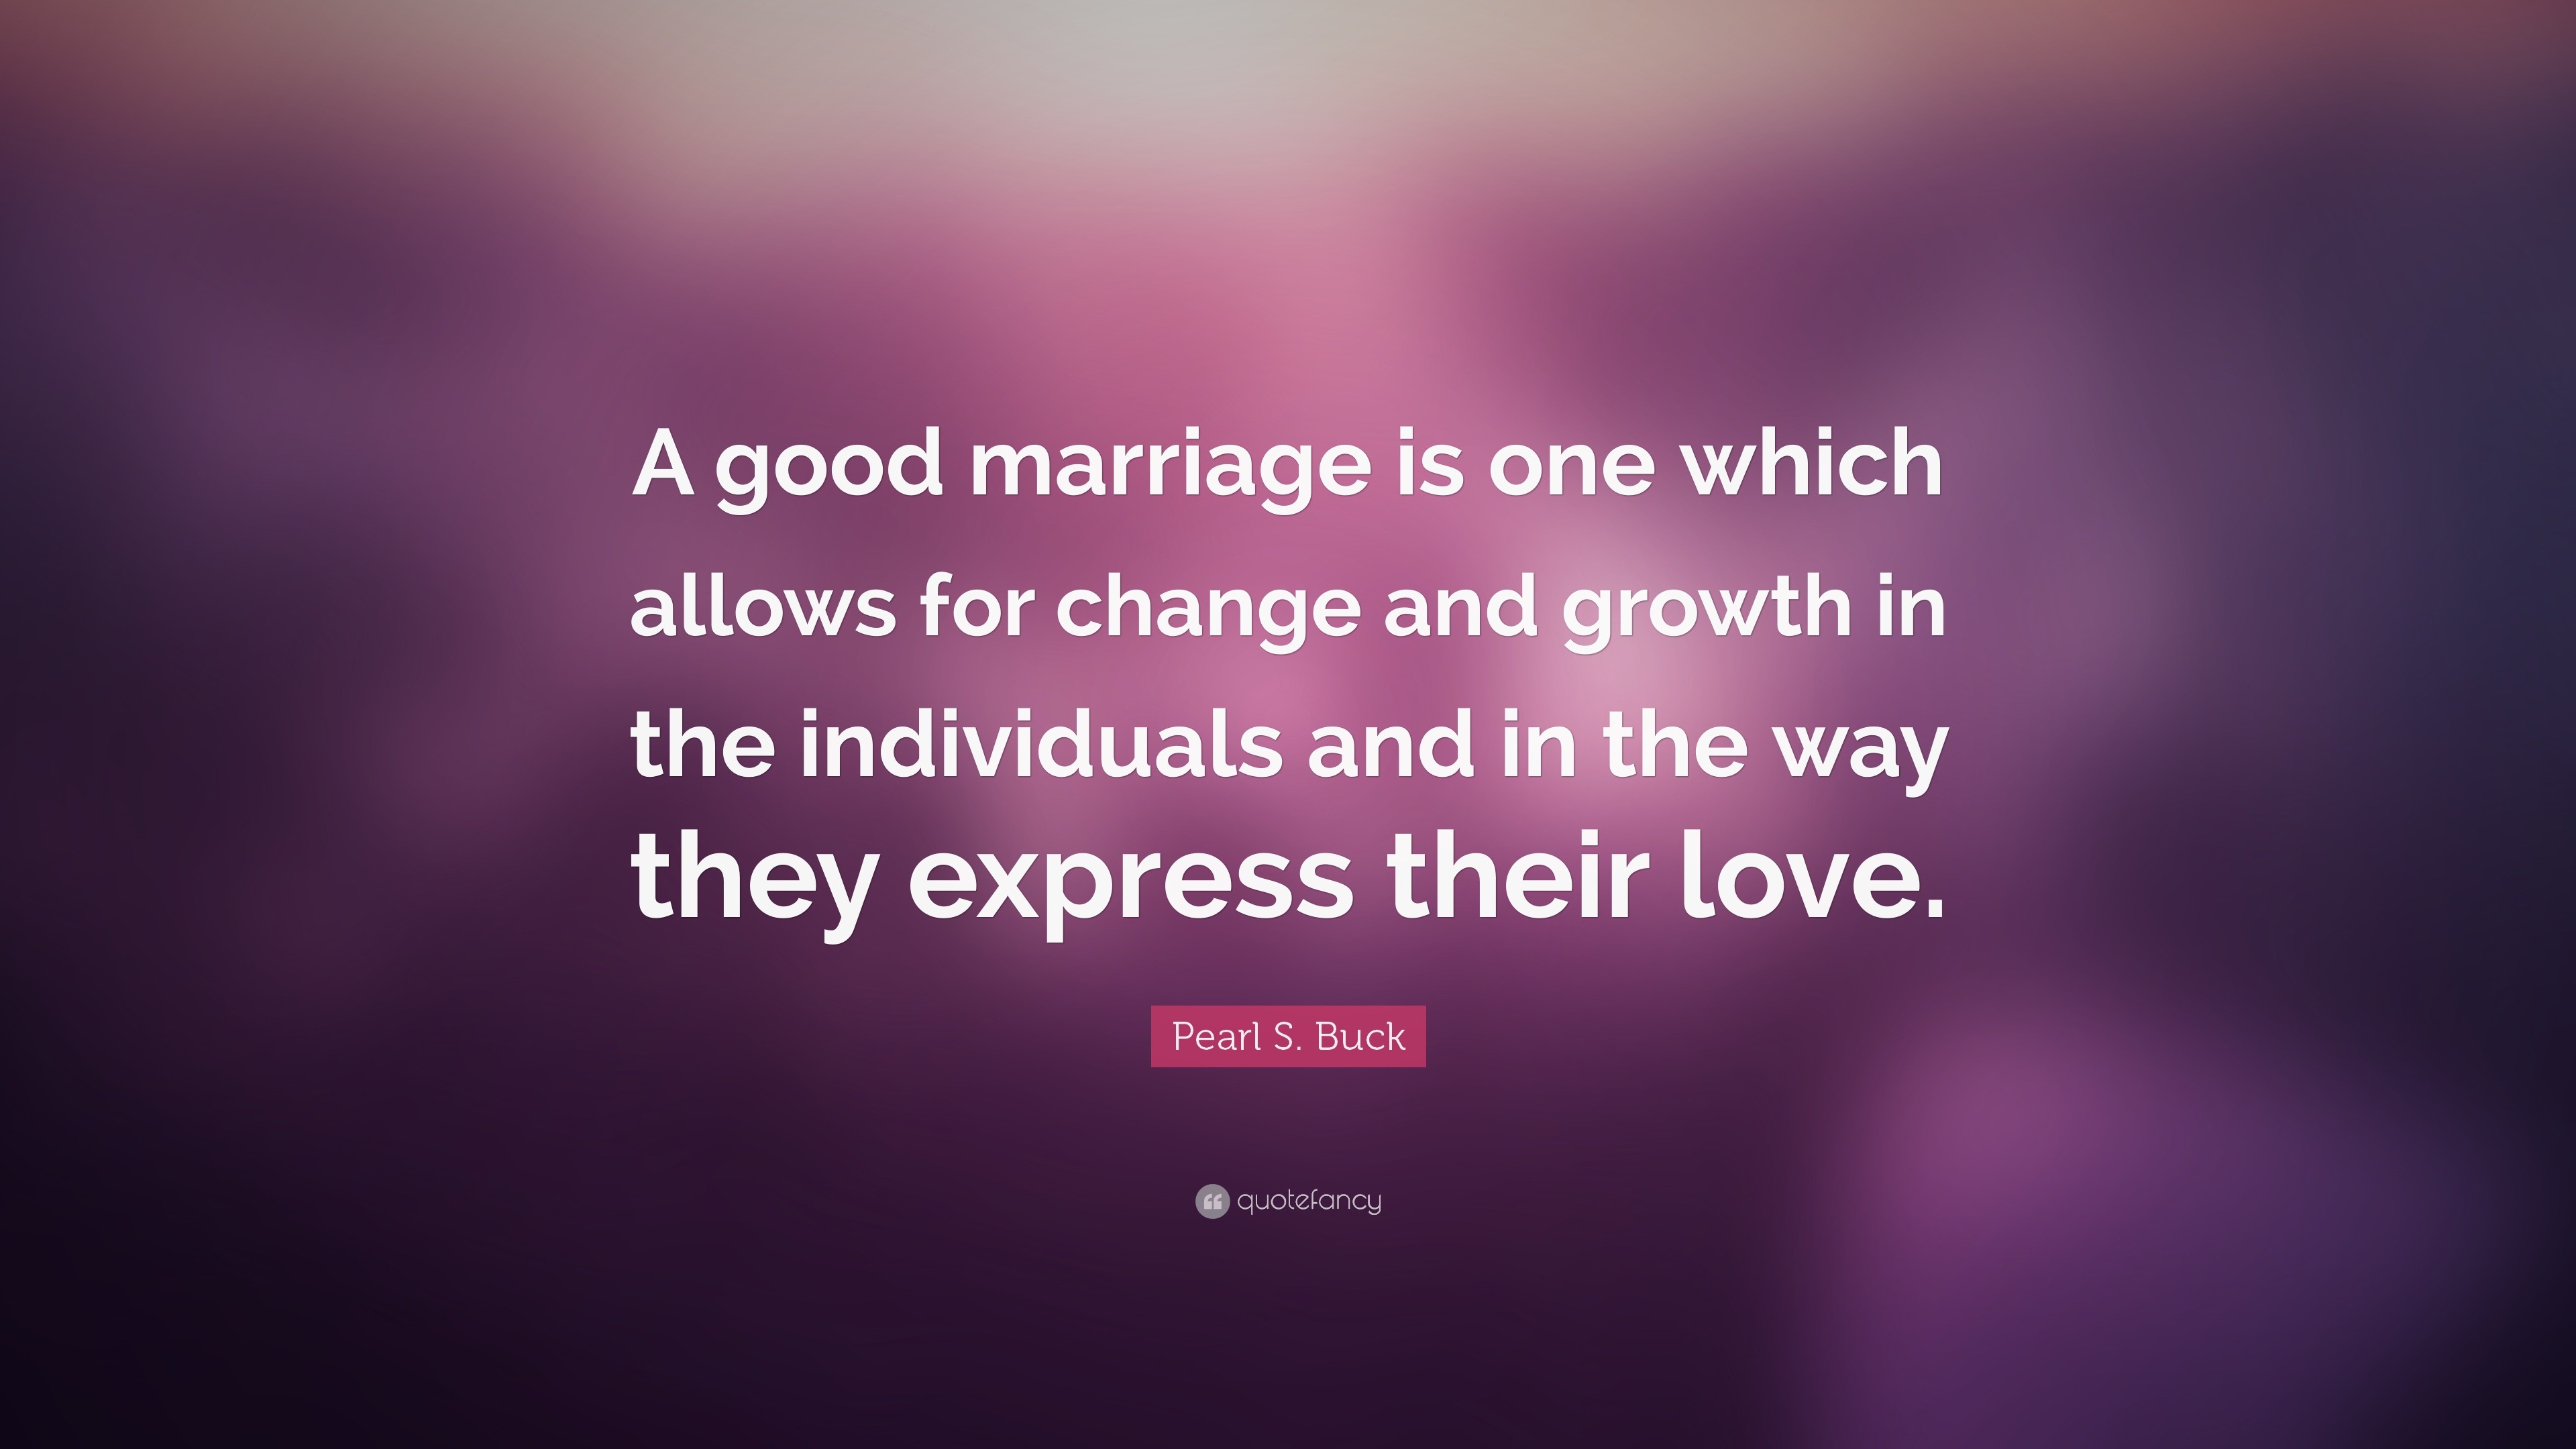 Pearl S. Buck Quote: “A good marriage is one which allows for change ...